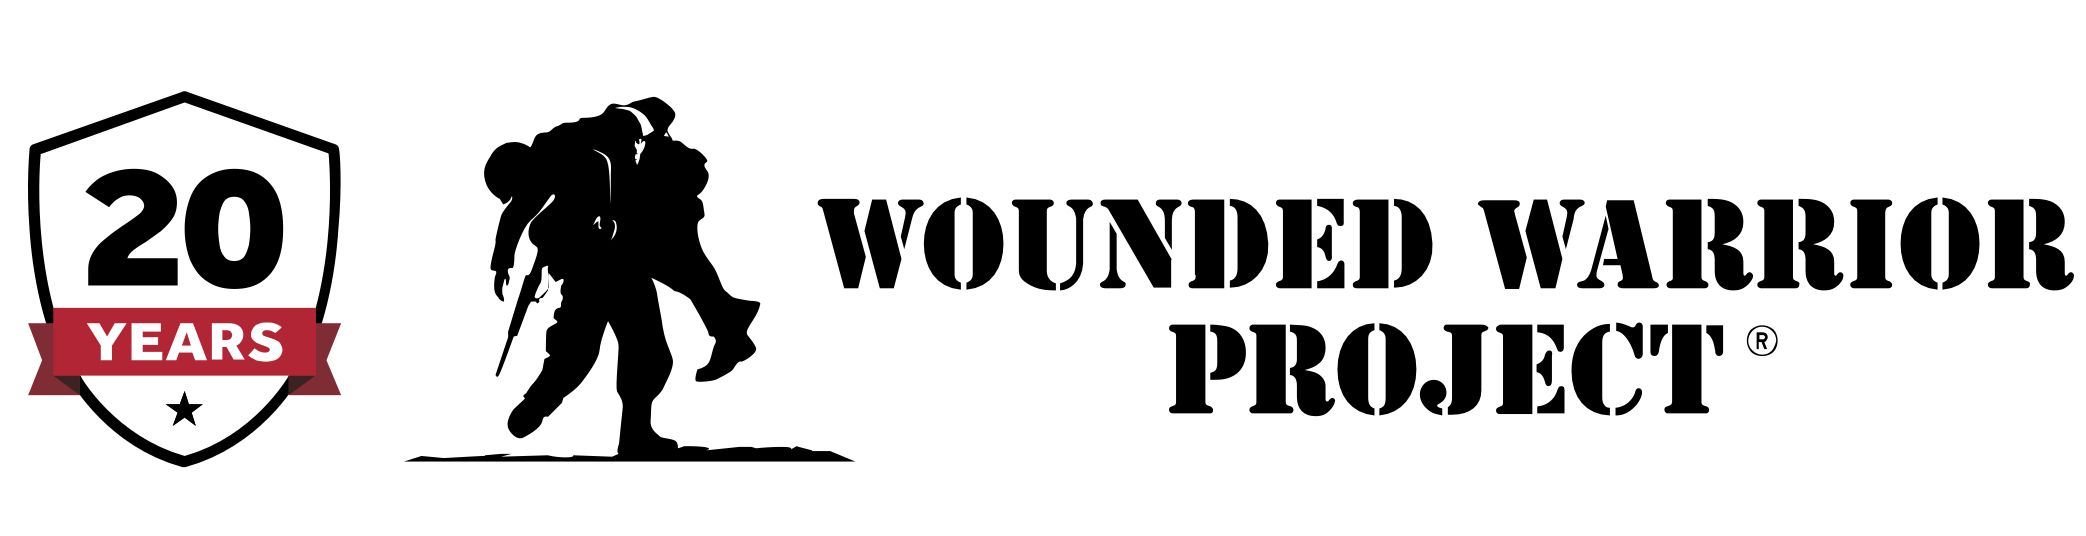 Wounded Warrior Project Cheyenne Construction Group Sugar Land TX